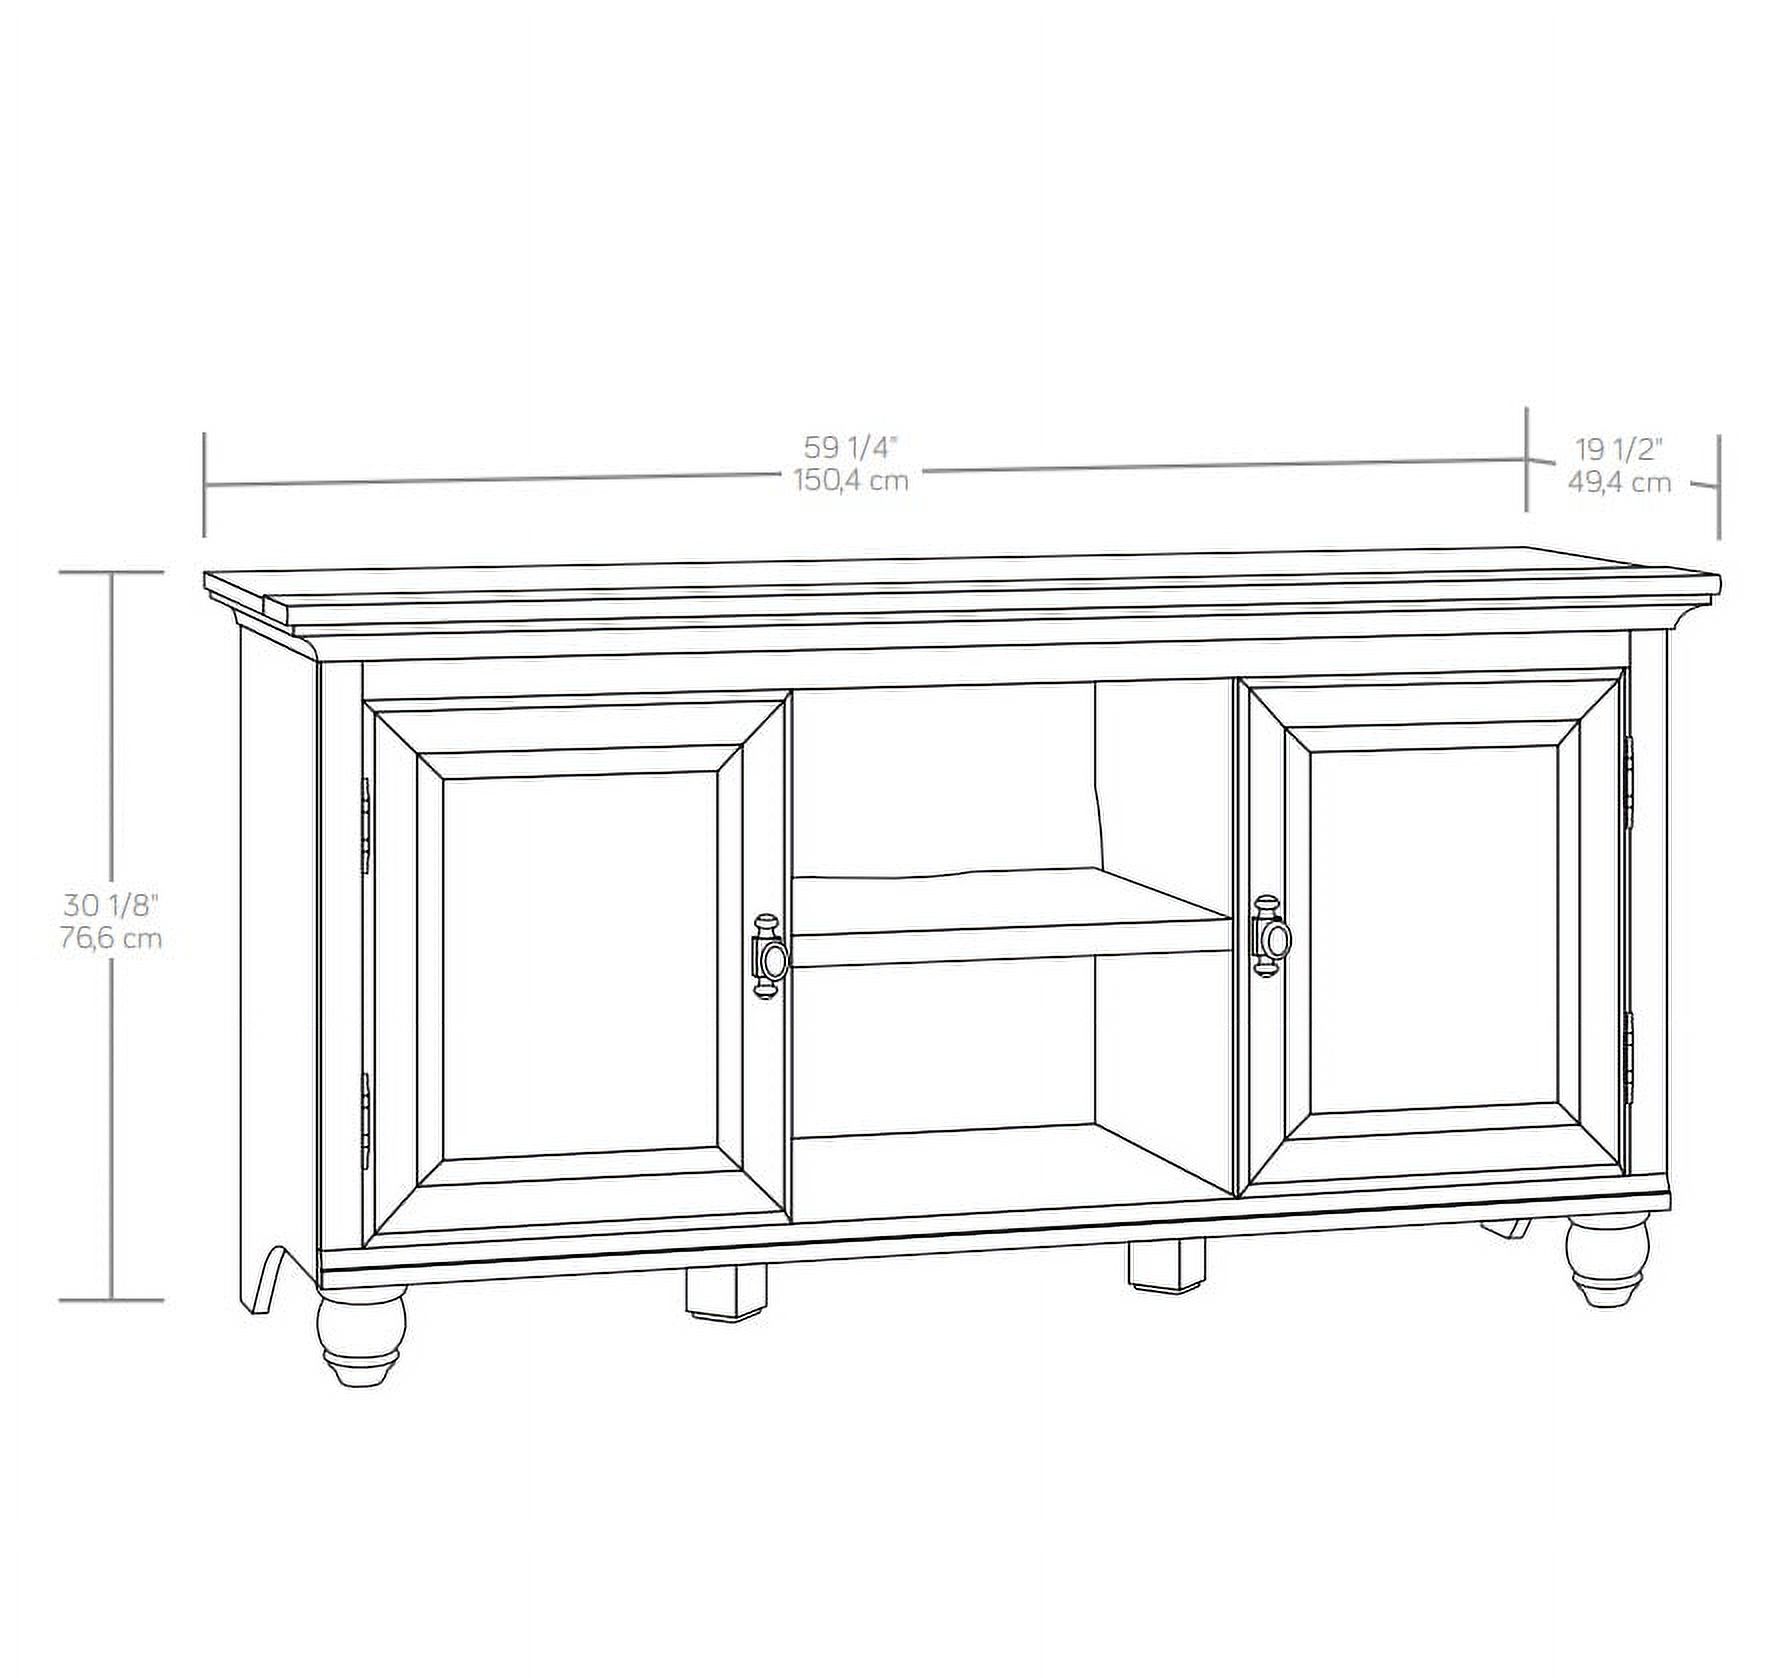 Better Homes & Gardens Crossmill TV Stand for TVs up to 65", Weathered Finish - image 5 of 9